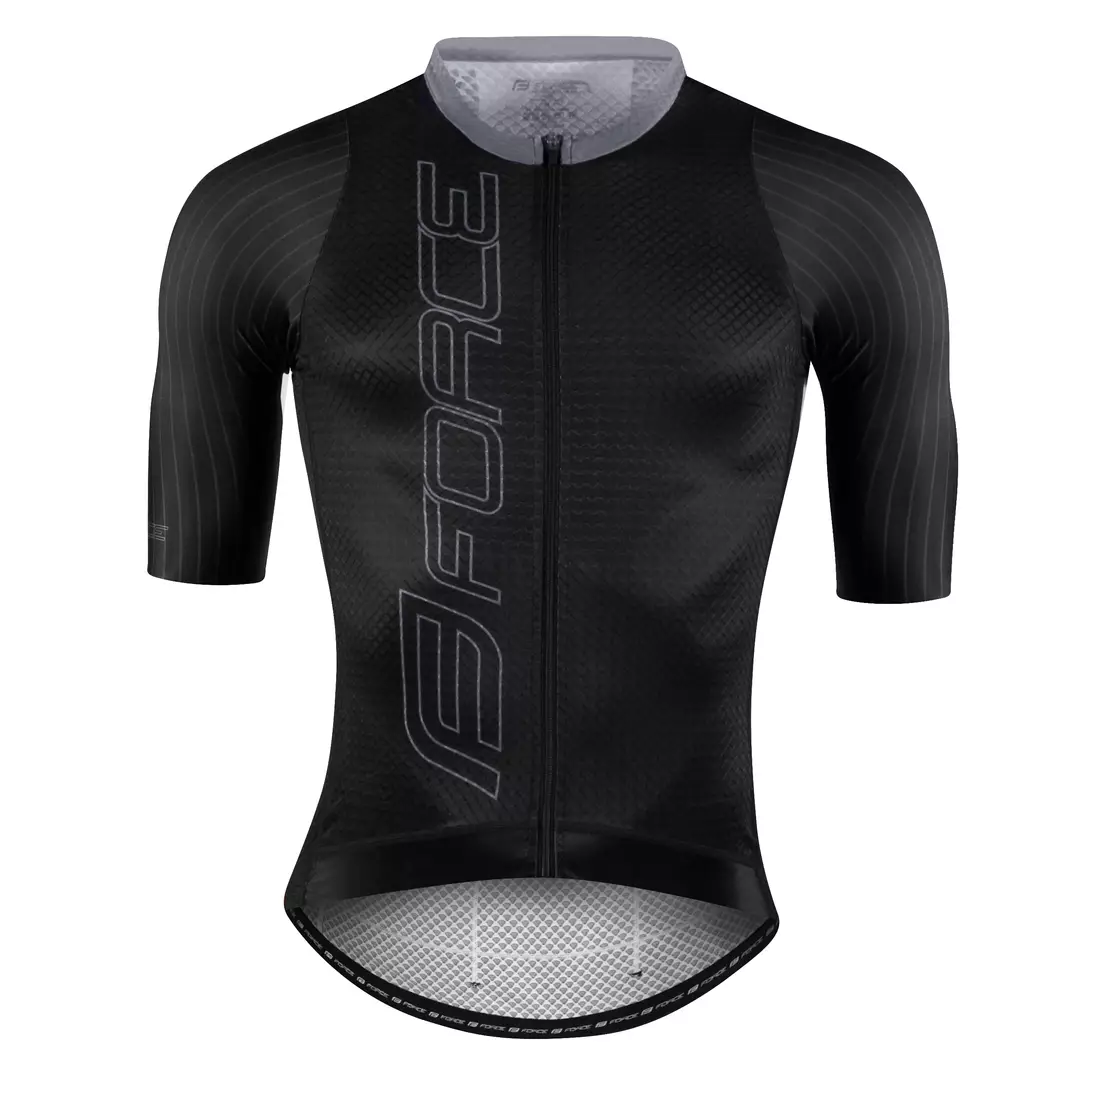 FORCE Men's cycling jersey TEAM PRO, black and gray 900111